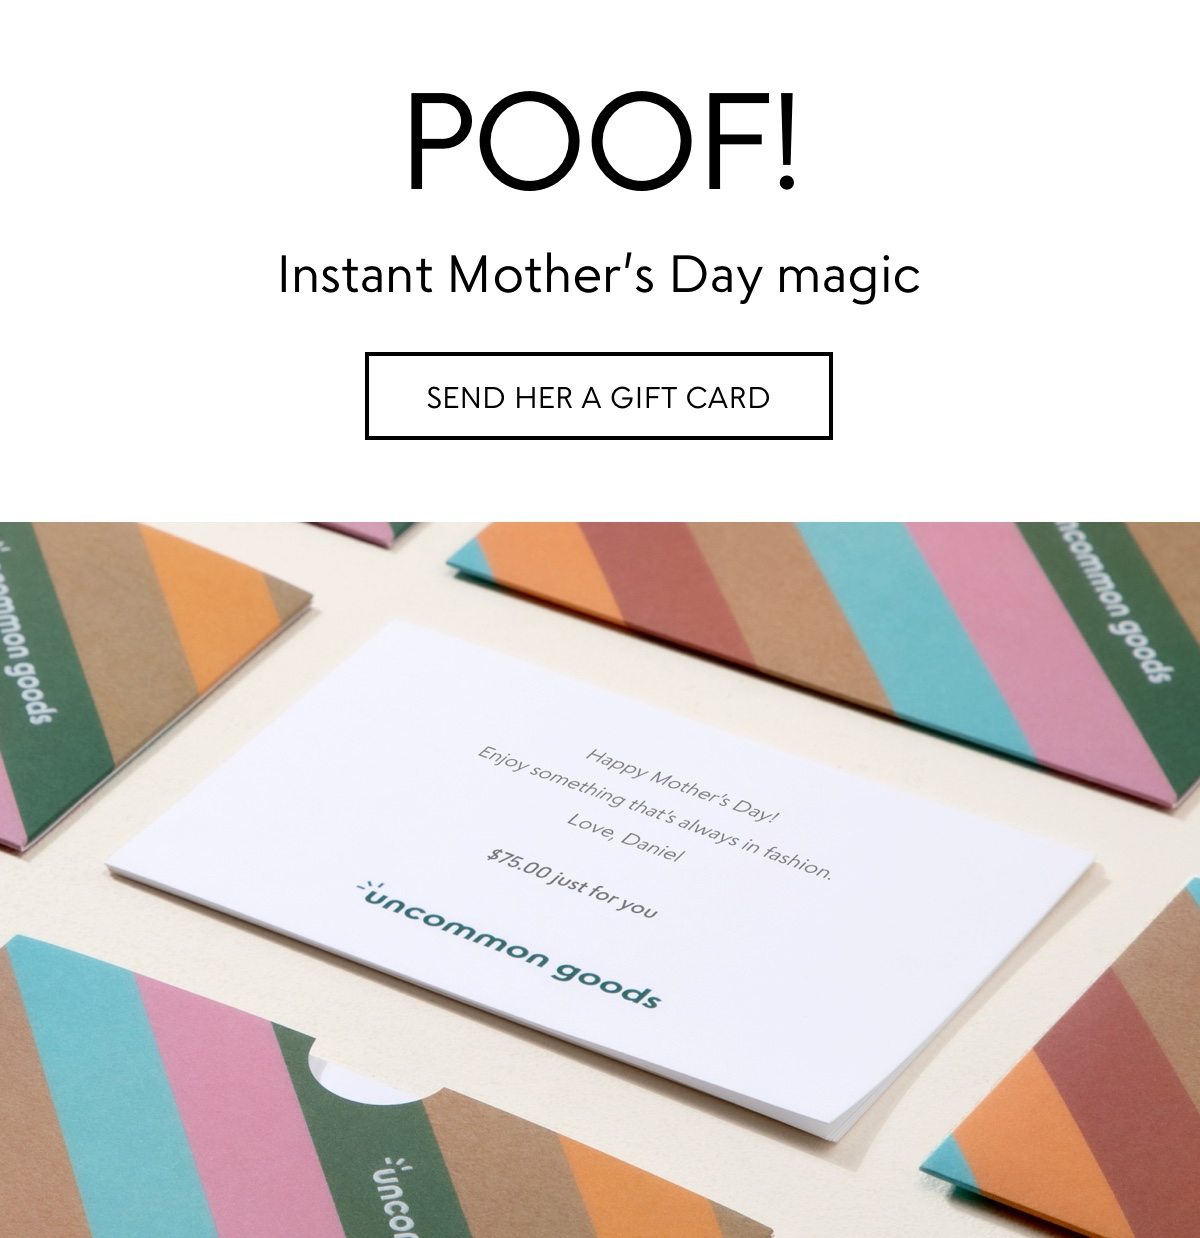 POOF! Instant Mother’s Day magic: send her a gift card